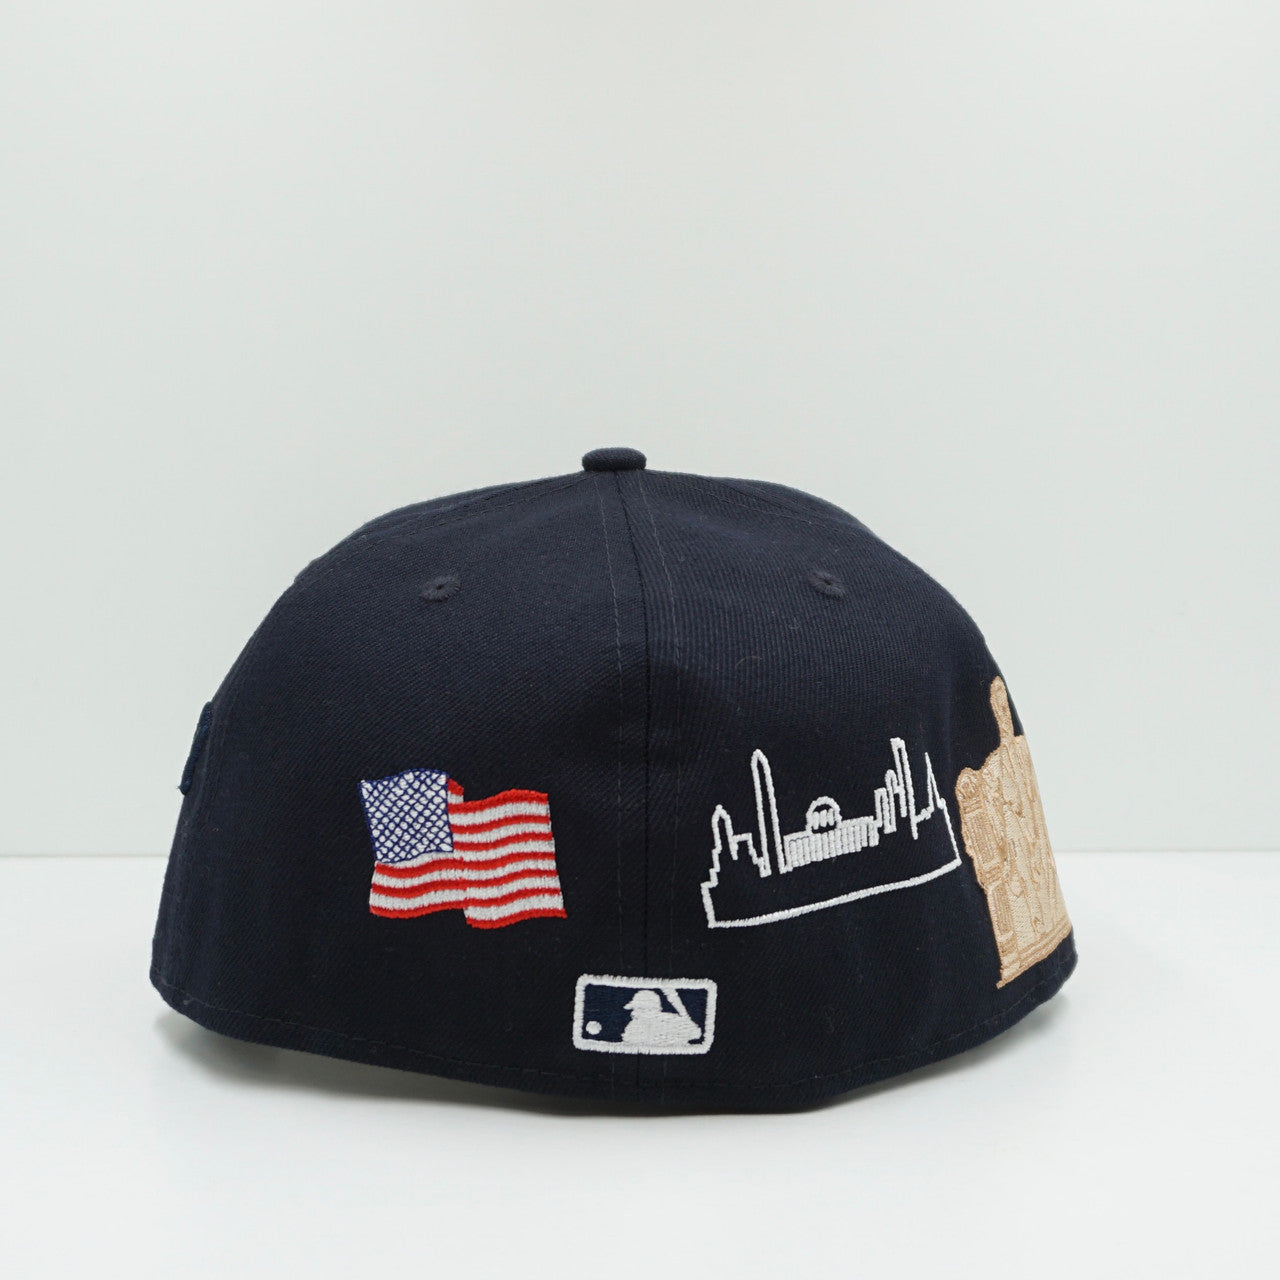 New Era Washington Nationals Script Navy/Red Fitted Cap